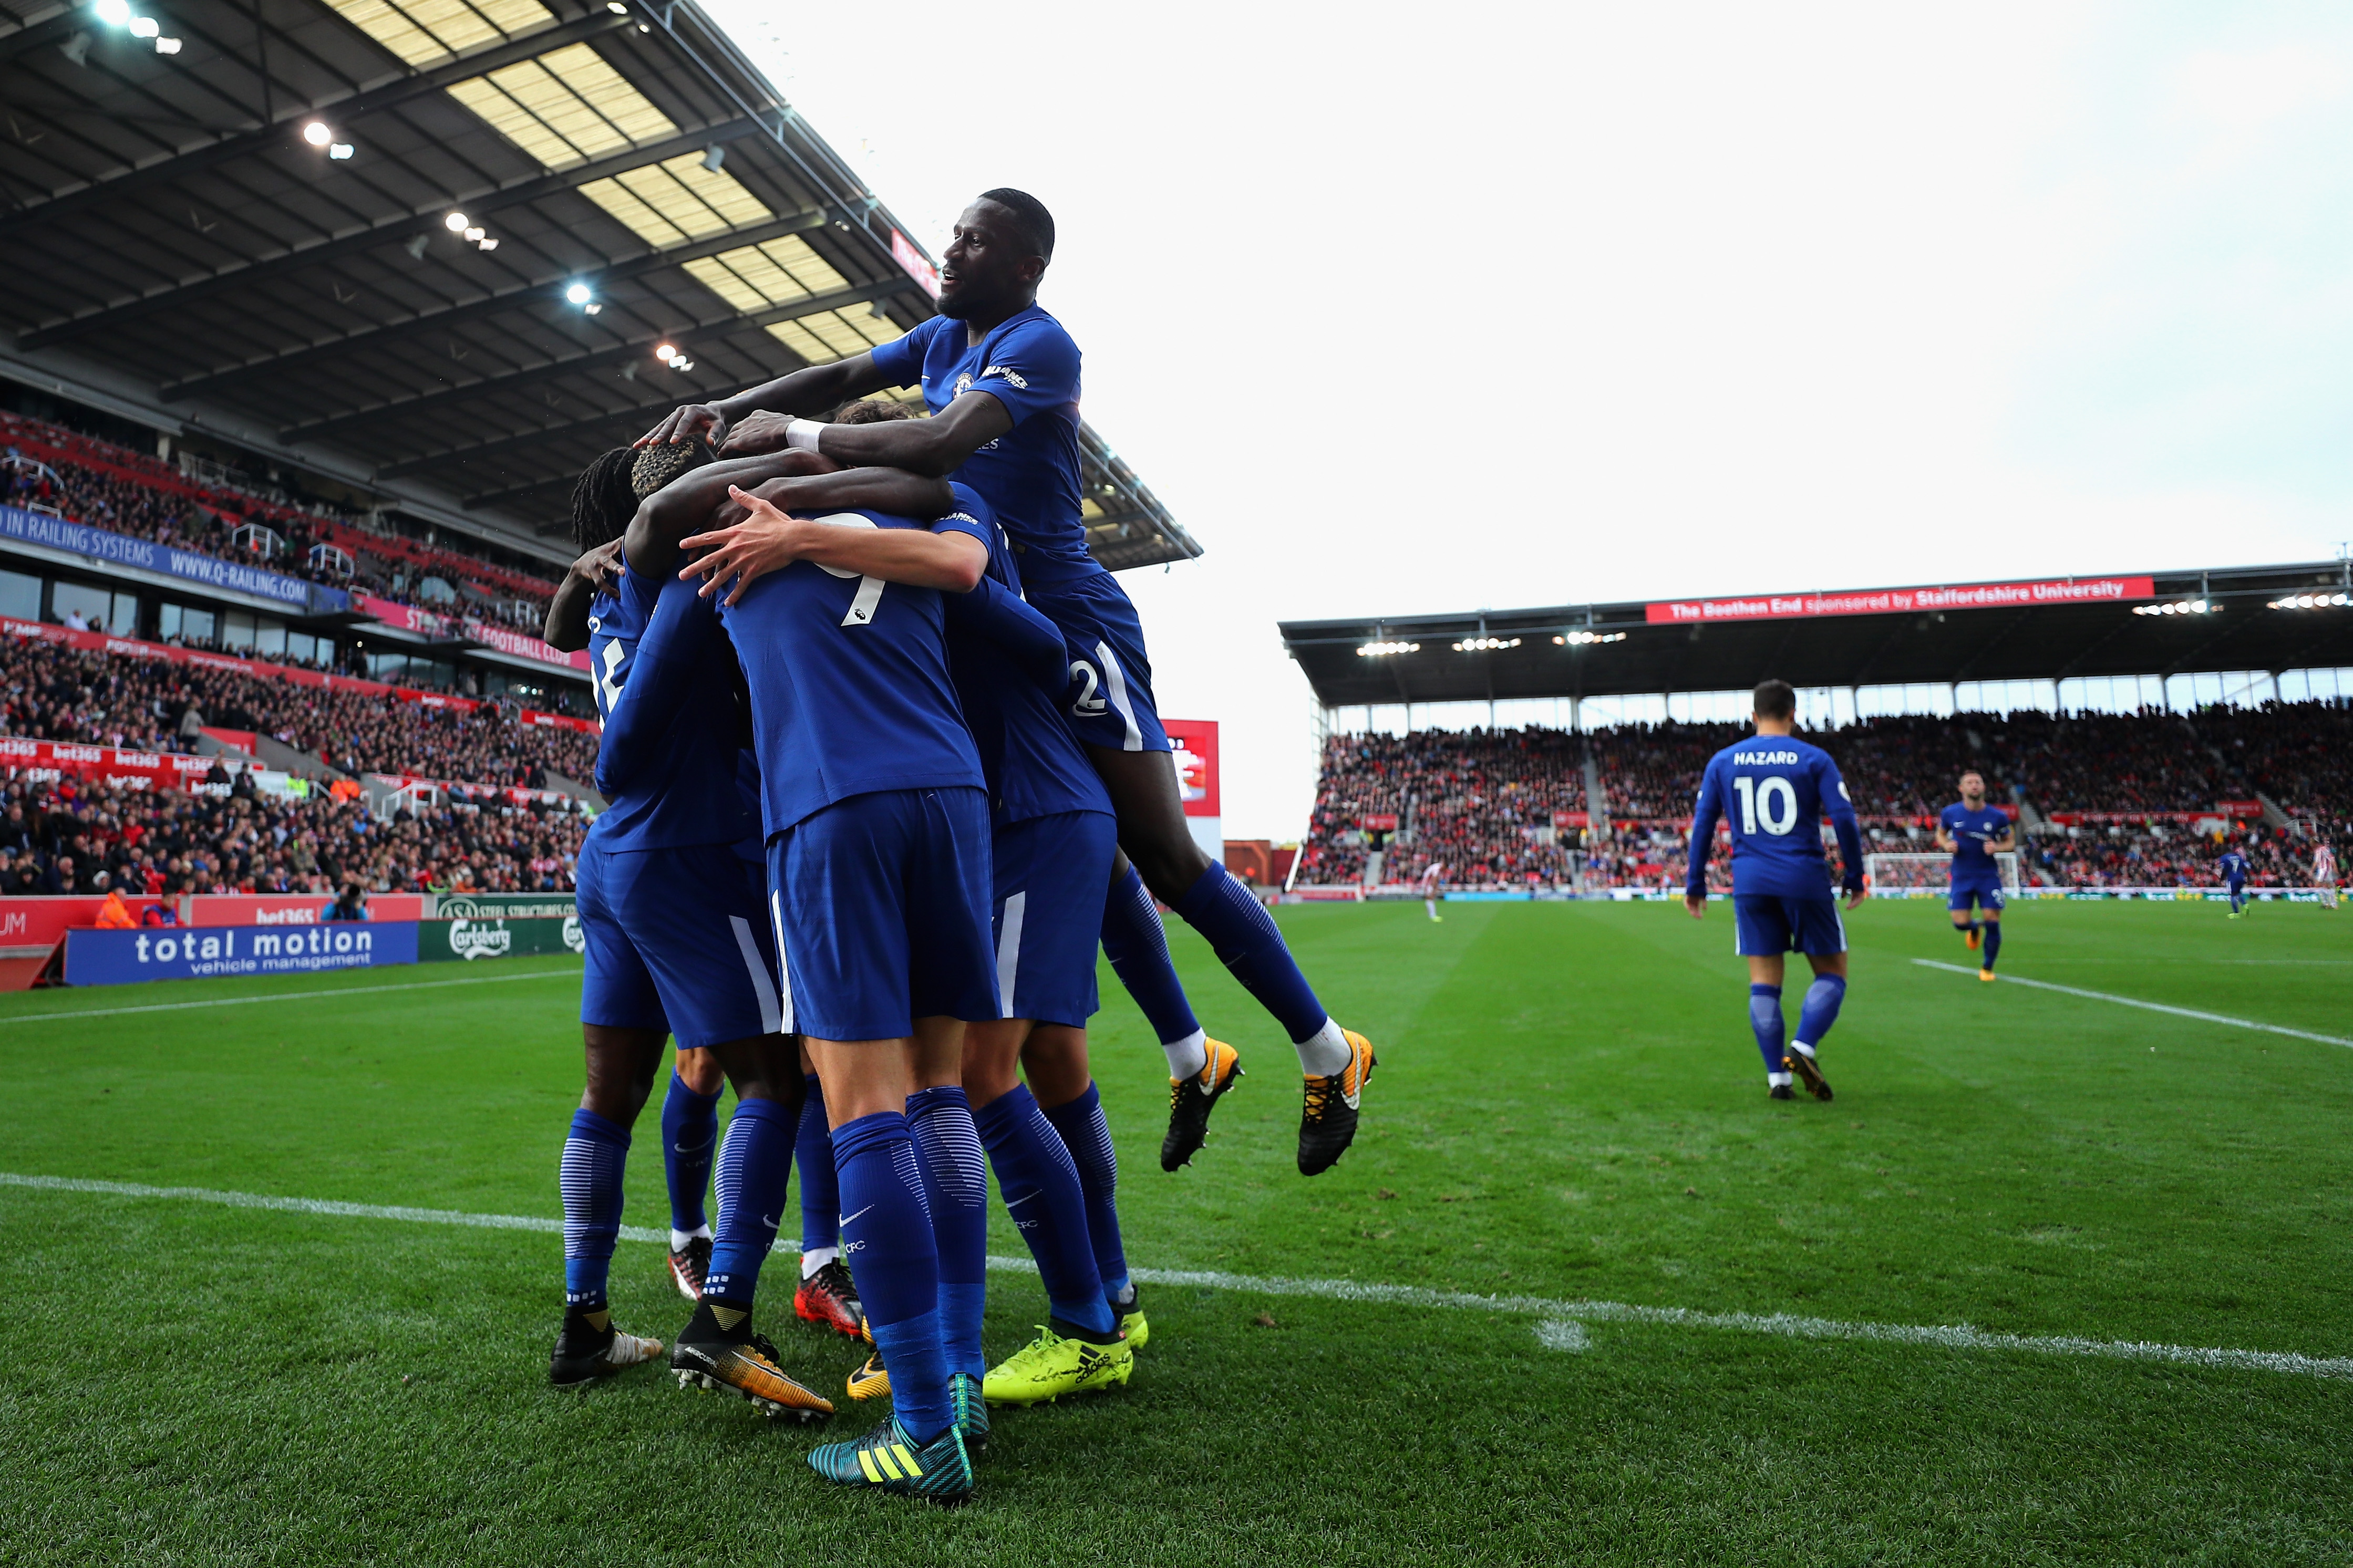 STOKE ON TRENT, ENGLAND - SEPTEMBER 23:  Alvaro Morata of Chelsea celebrates scoring his sides thir goal with his Chelsea team mates during the Premier League match between Stoke City and Chelsea at Bet365 Stadium on September 23, 2017 in Stoke on Trent, England.  (Photo by Richard Heathcote/Getty Images)